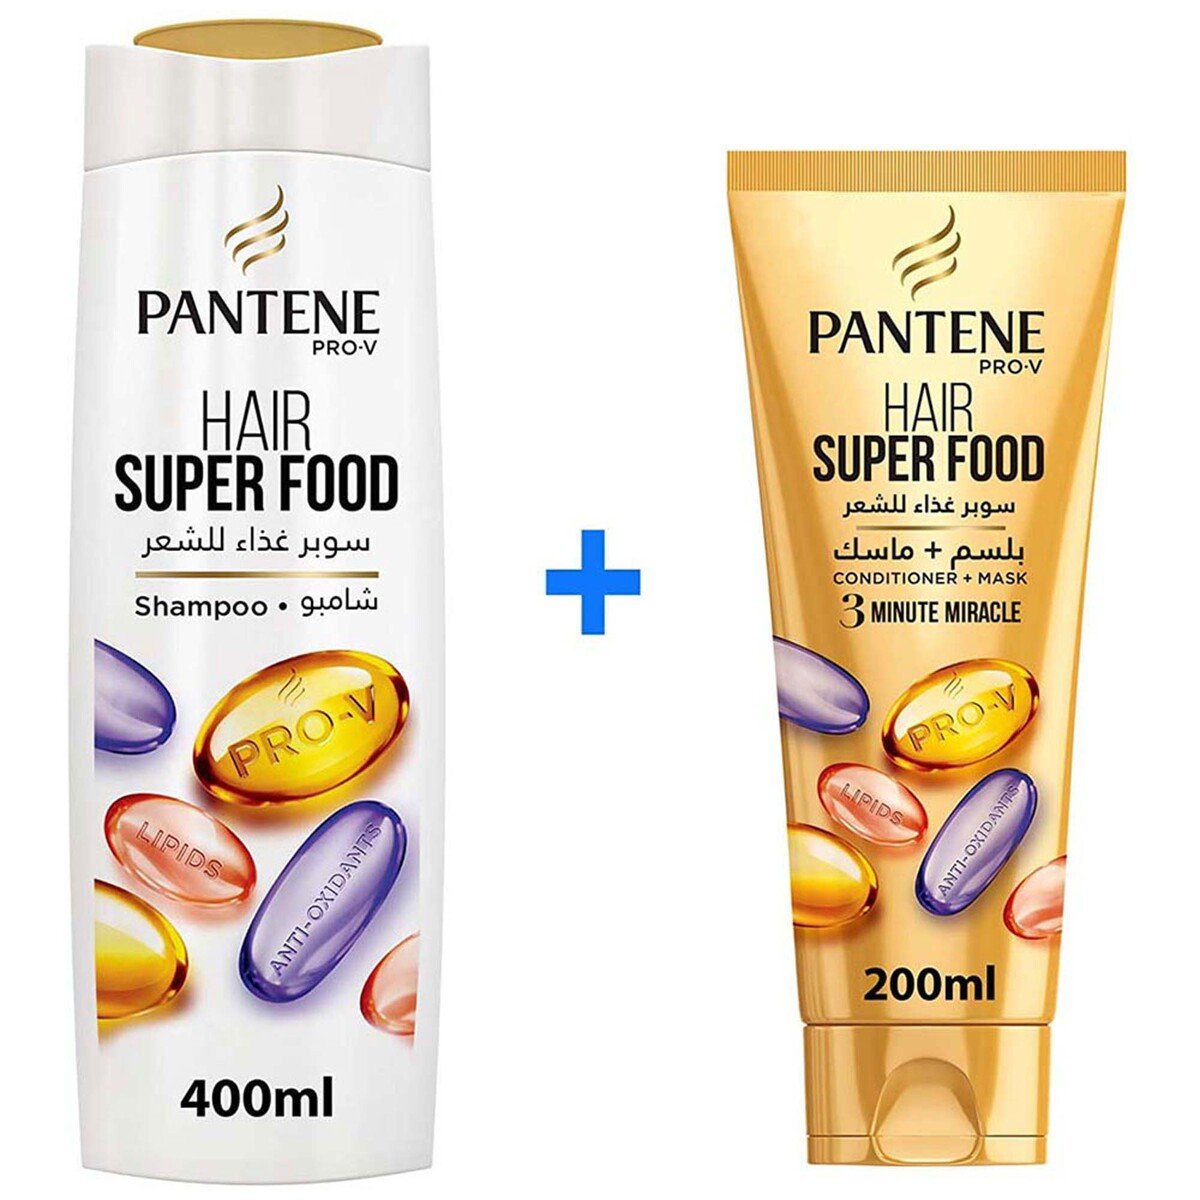 Pantene ProV Hair Super Food 3 Minute Miracle Shampoo 400ml with Conditioner 200 ml